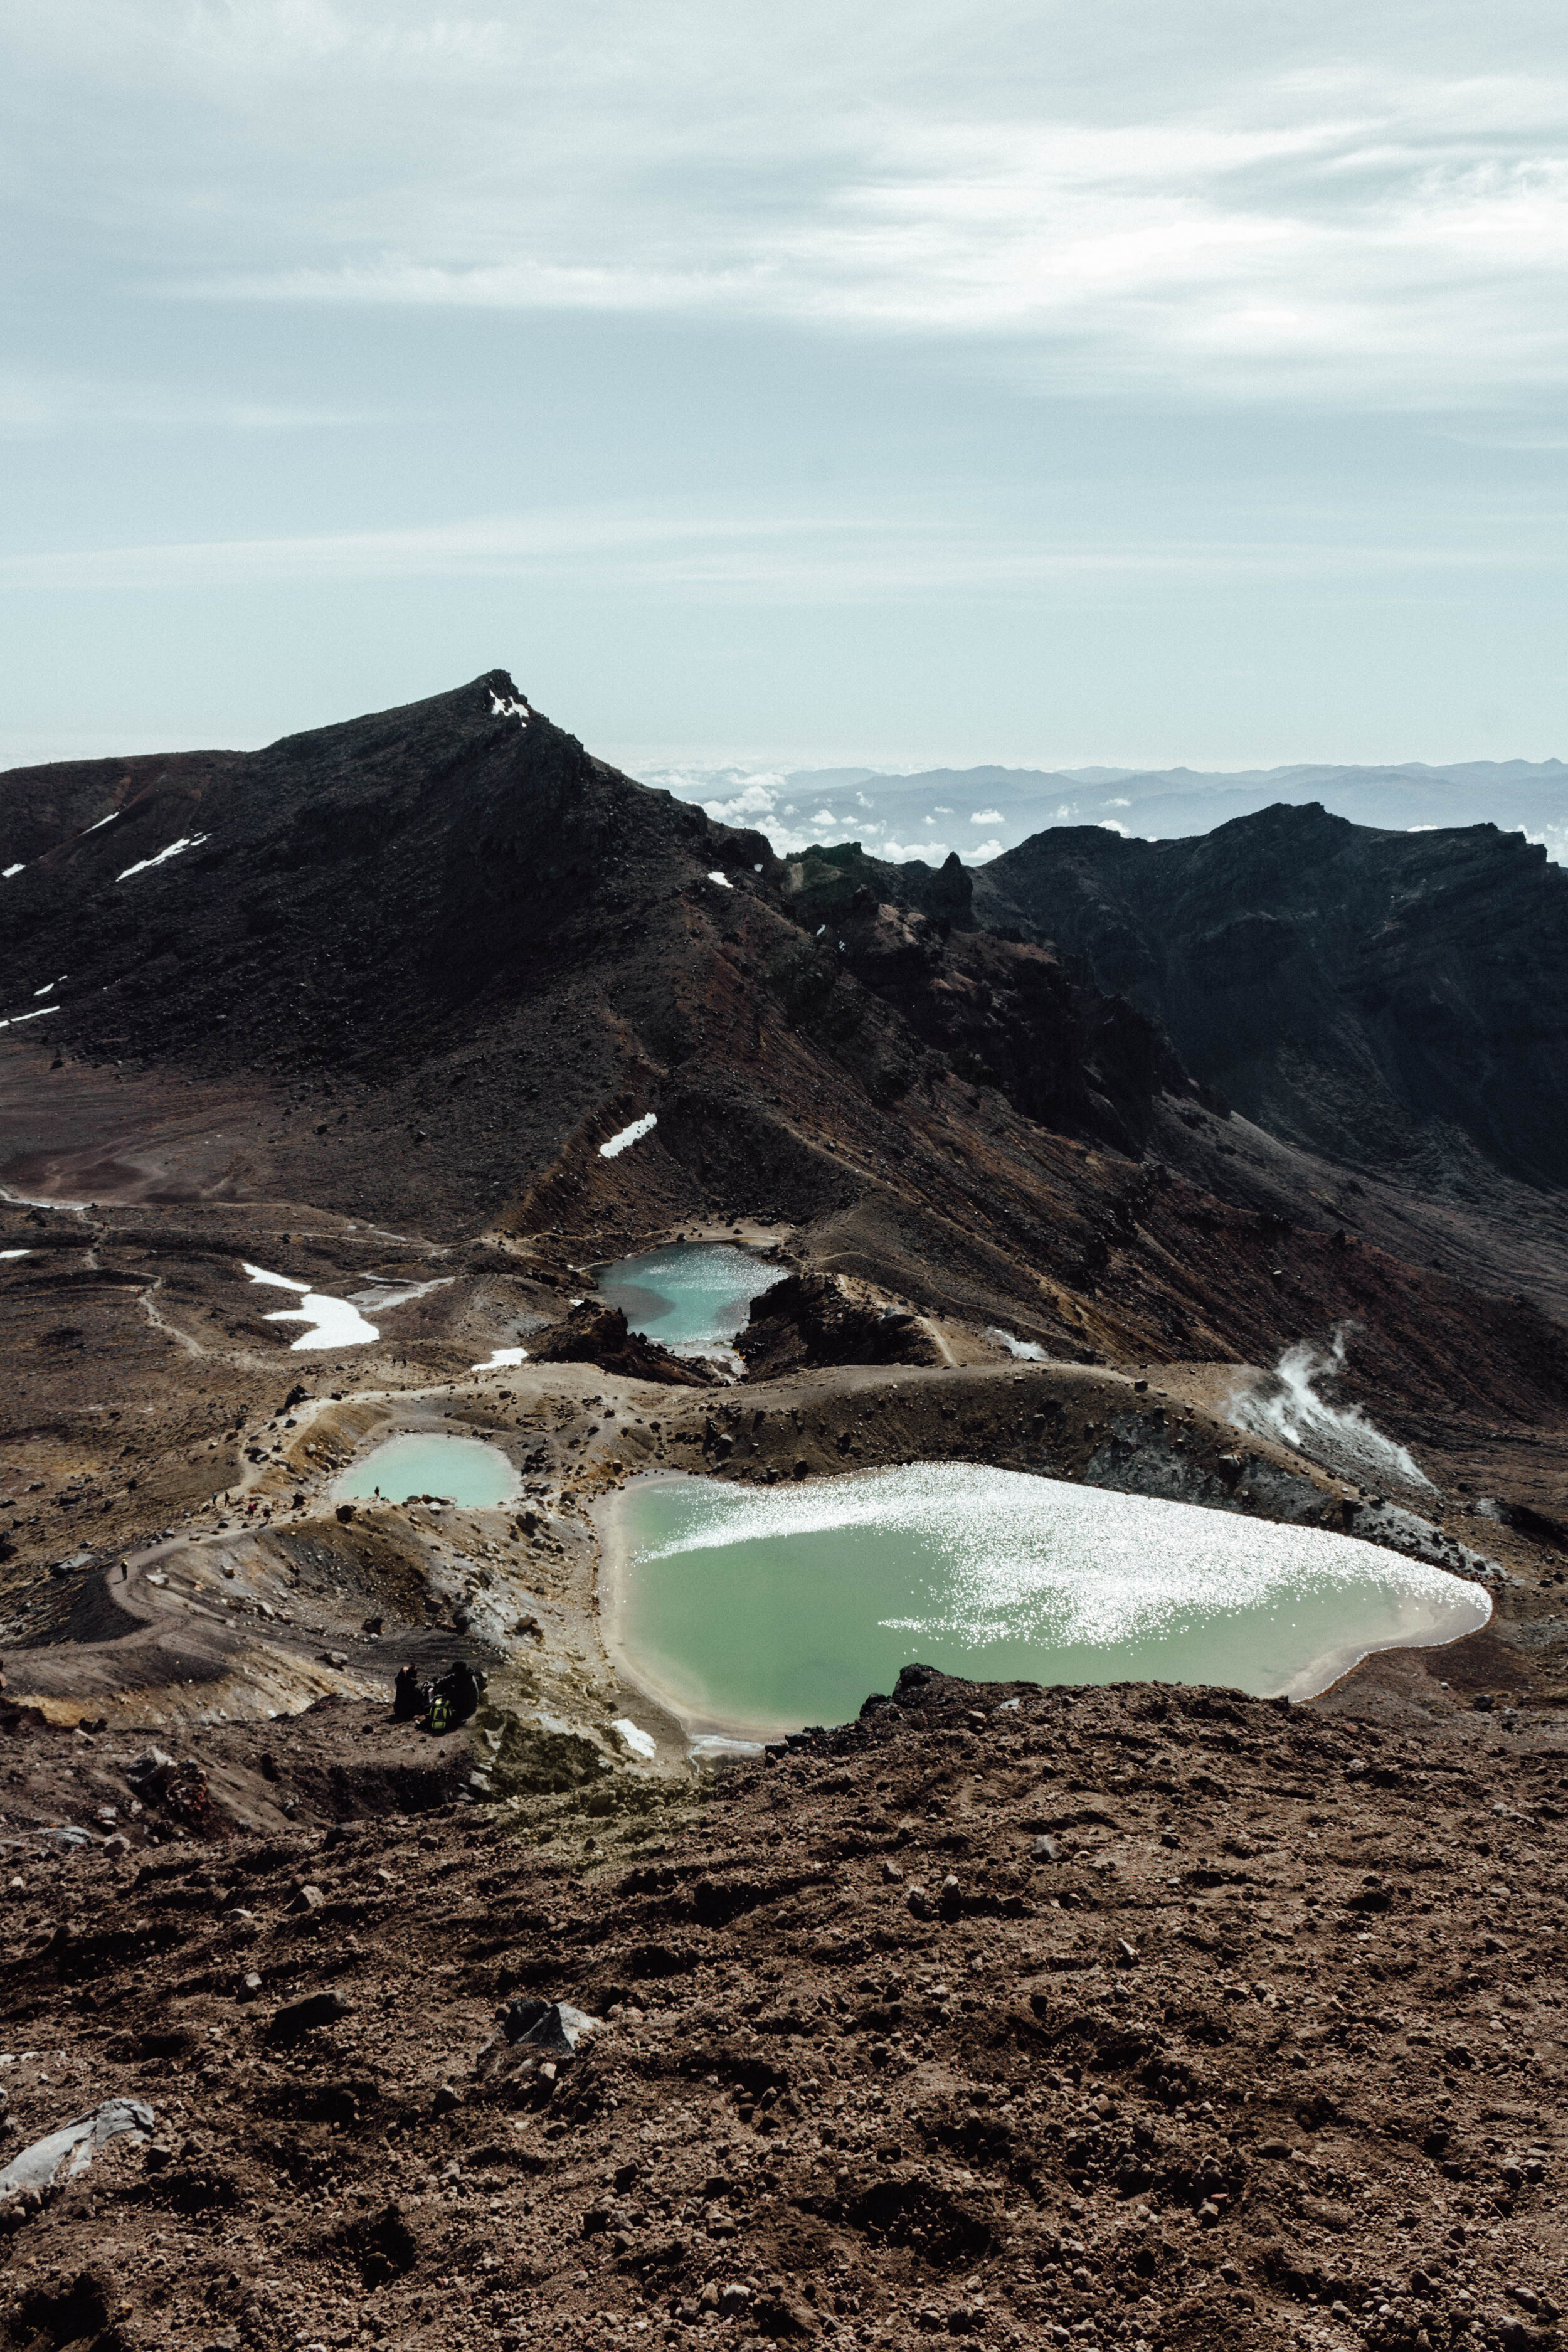 The water pools along the Tongariro crossing, New Zealand